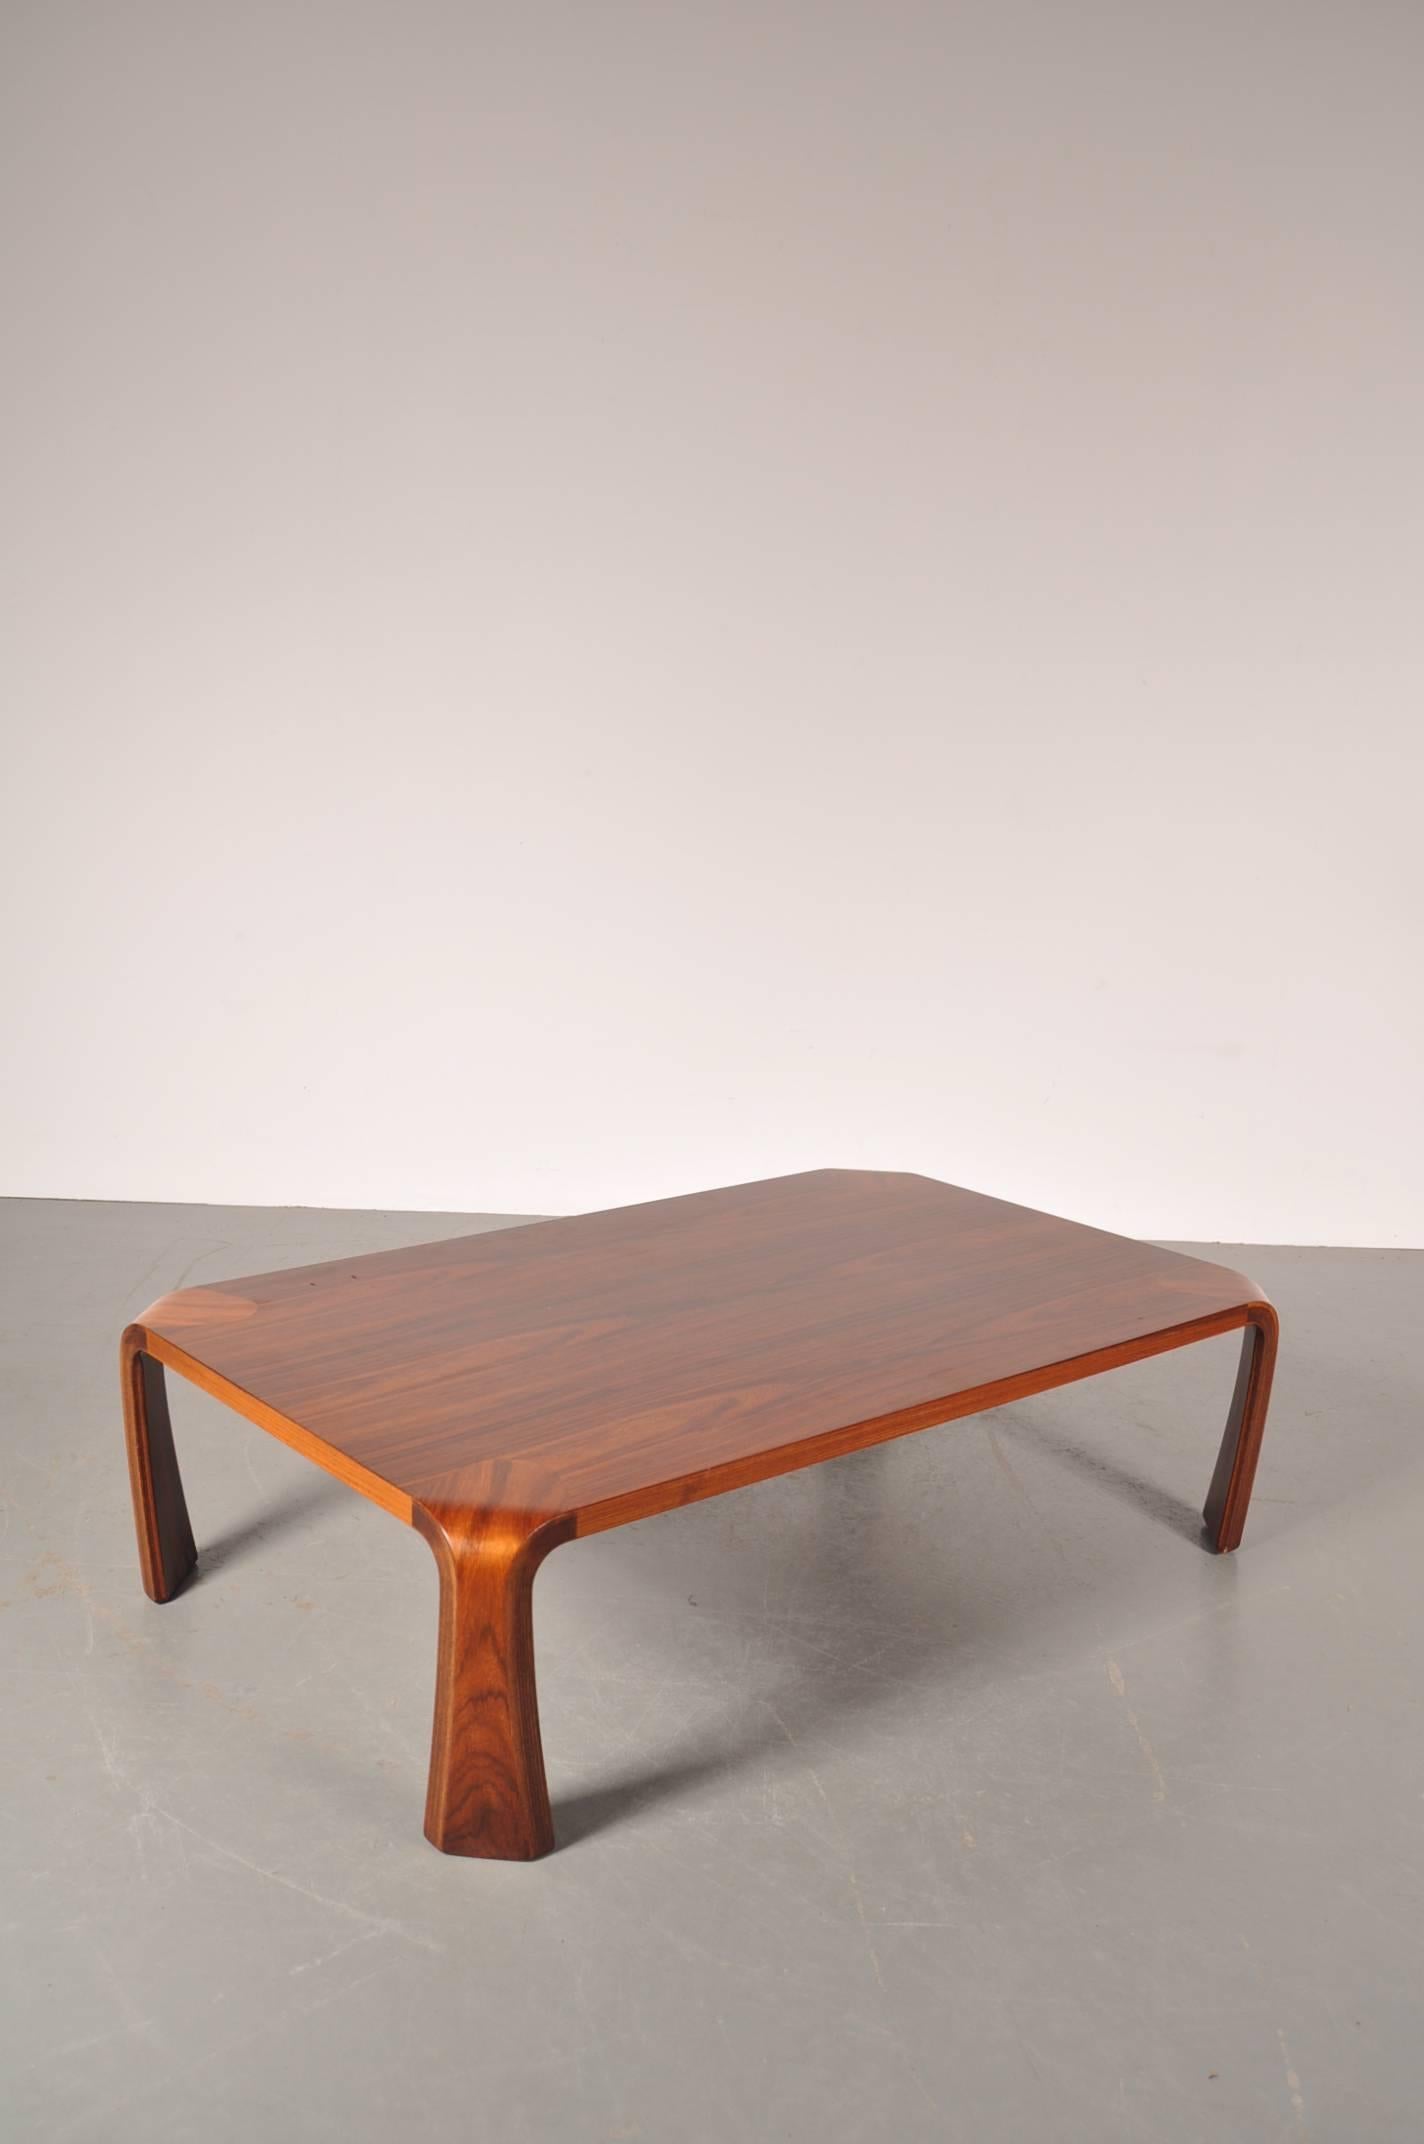 Stunning coffee table in bent rosewood, designed by Saburo Inui, manufactured by Tendo in Japan in the 1960s.

This beautiful table is a very representative piece for Japanese furniture thanks to its organic shape and efficient design. It is low,